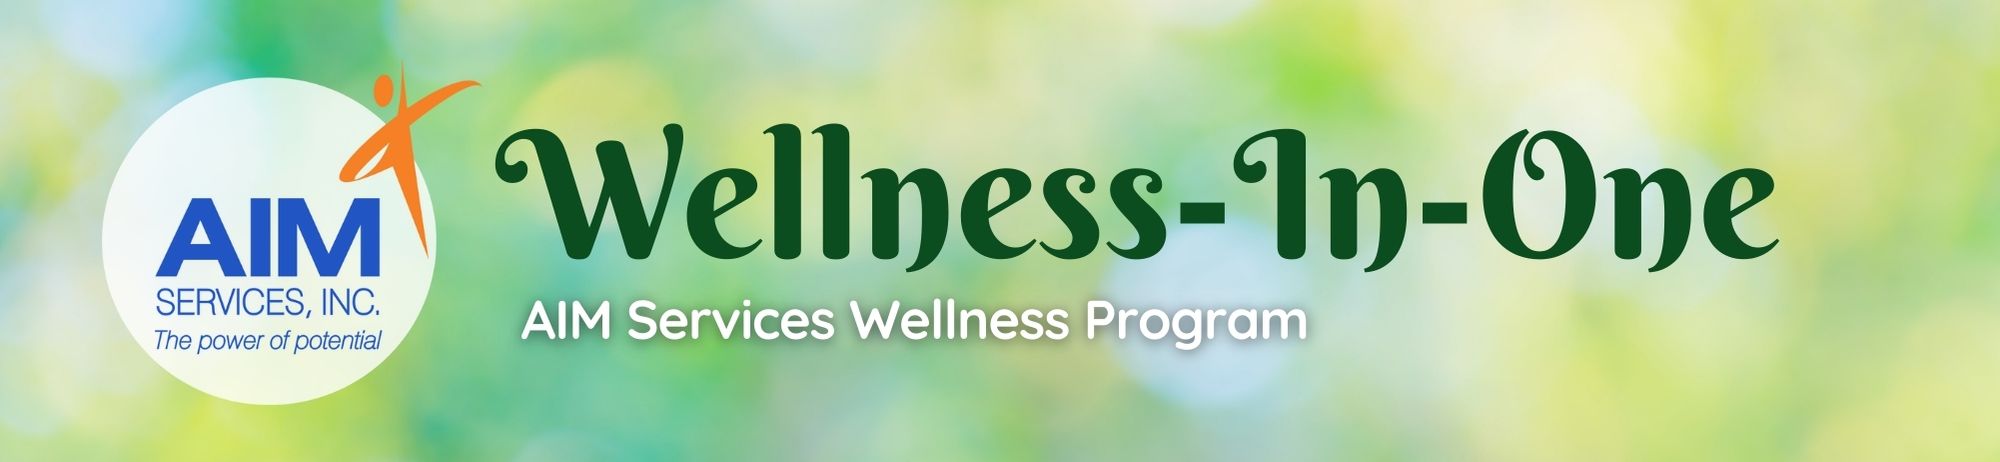 Wellness-in-one banner